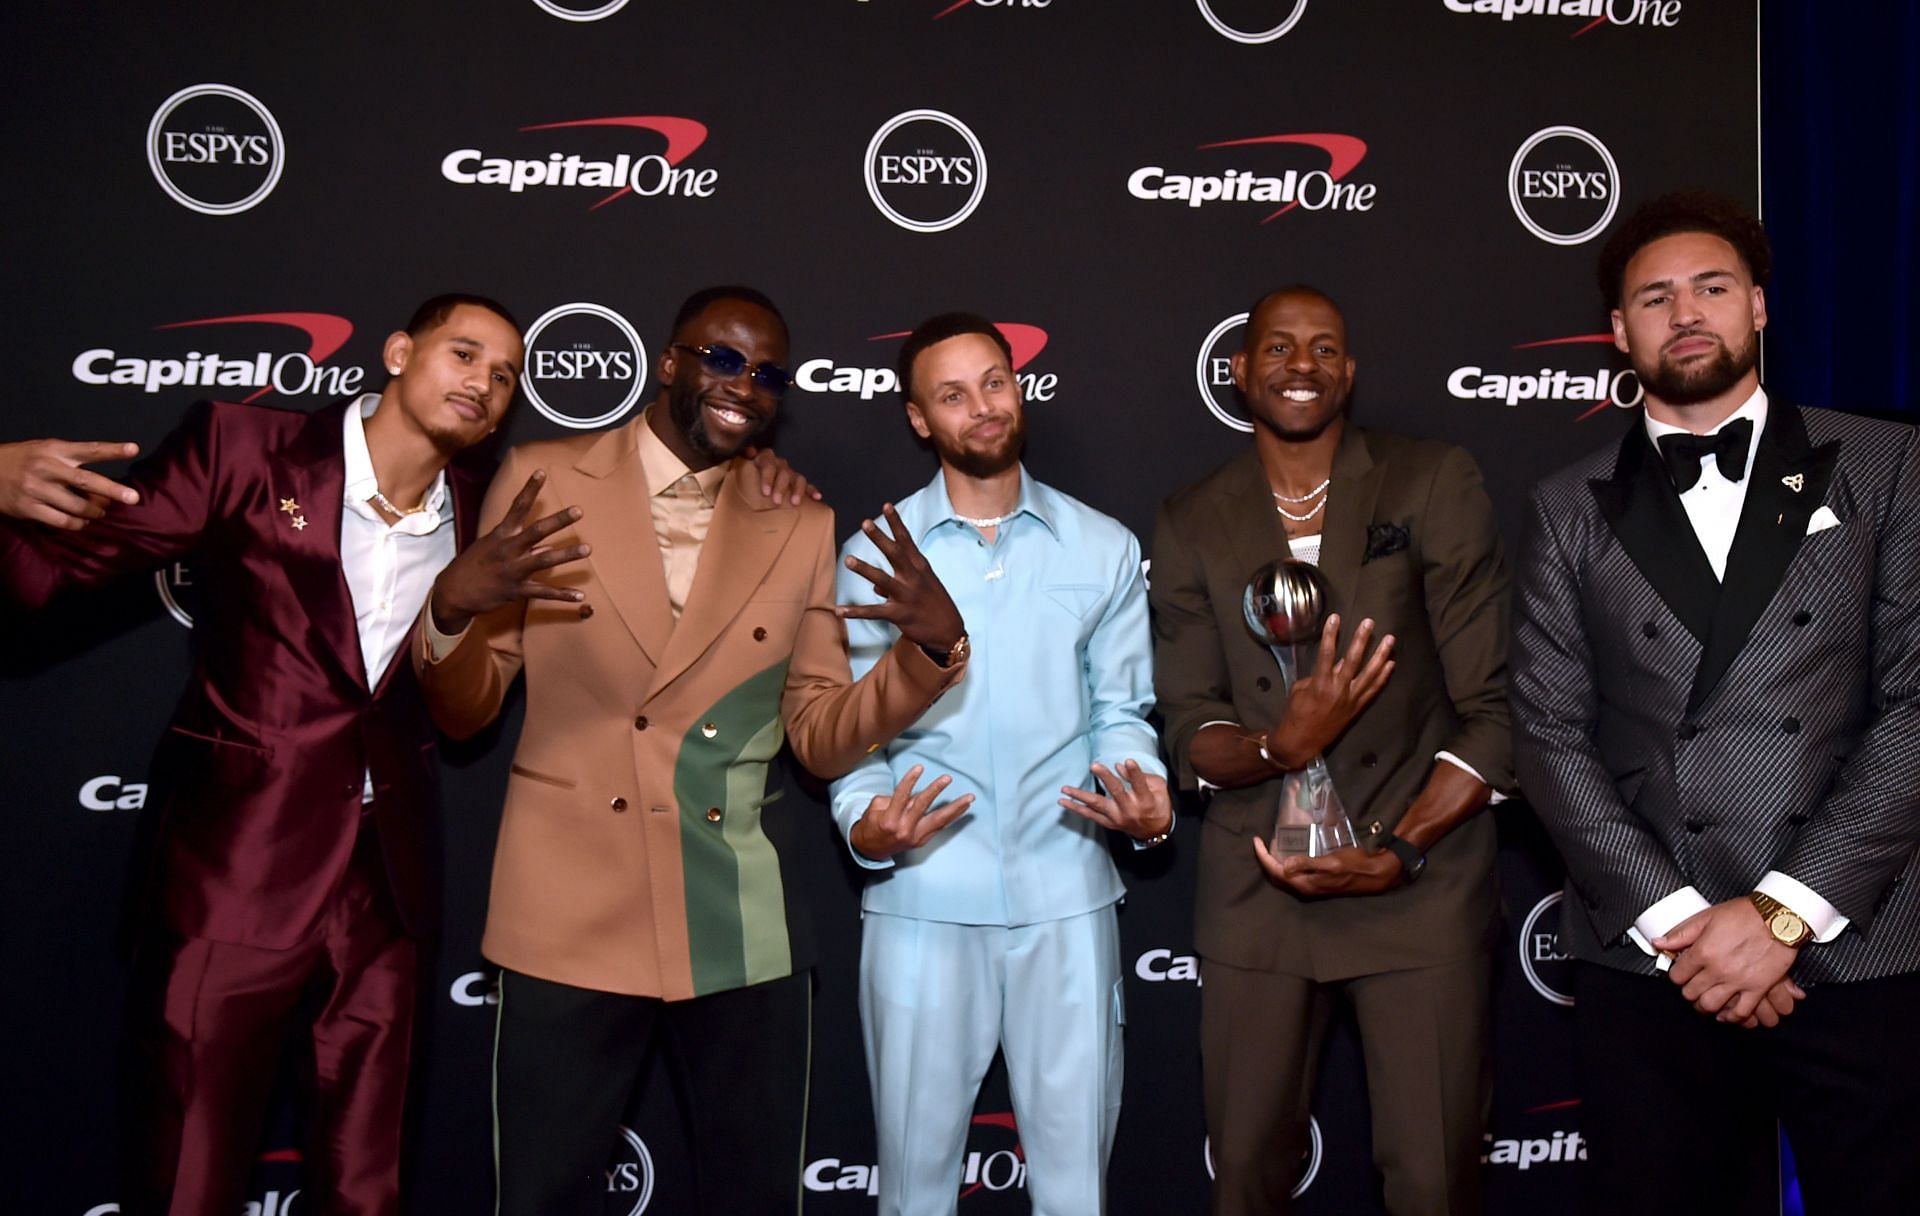 (L-R) Juan Toscano-Anderson, Draymond Green, Stephen Curry, Andre Iguodala and Klay Thompson of the Golden State Warriors backstage at the 2022 ESPYs